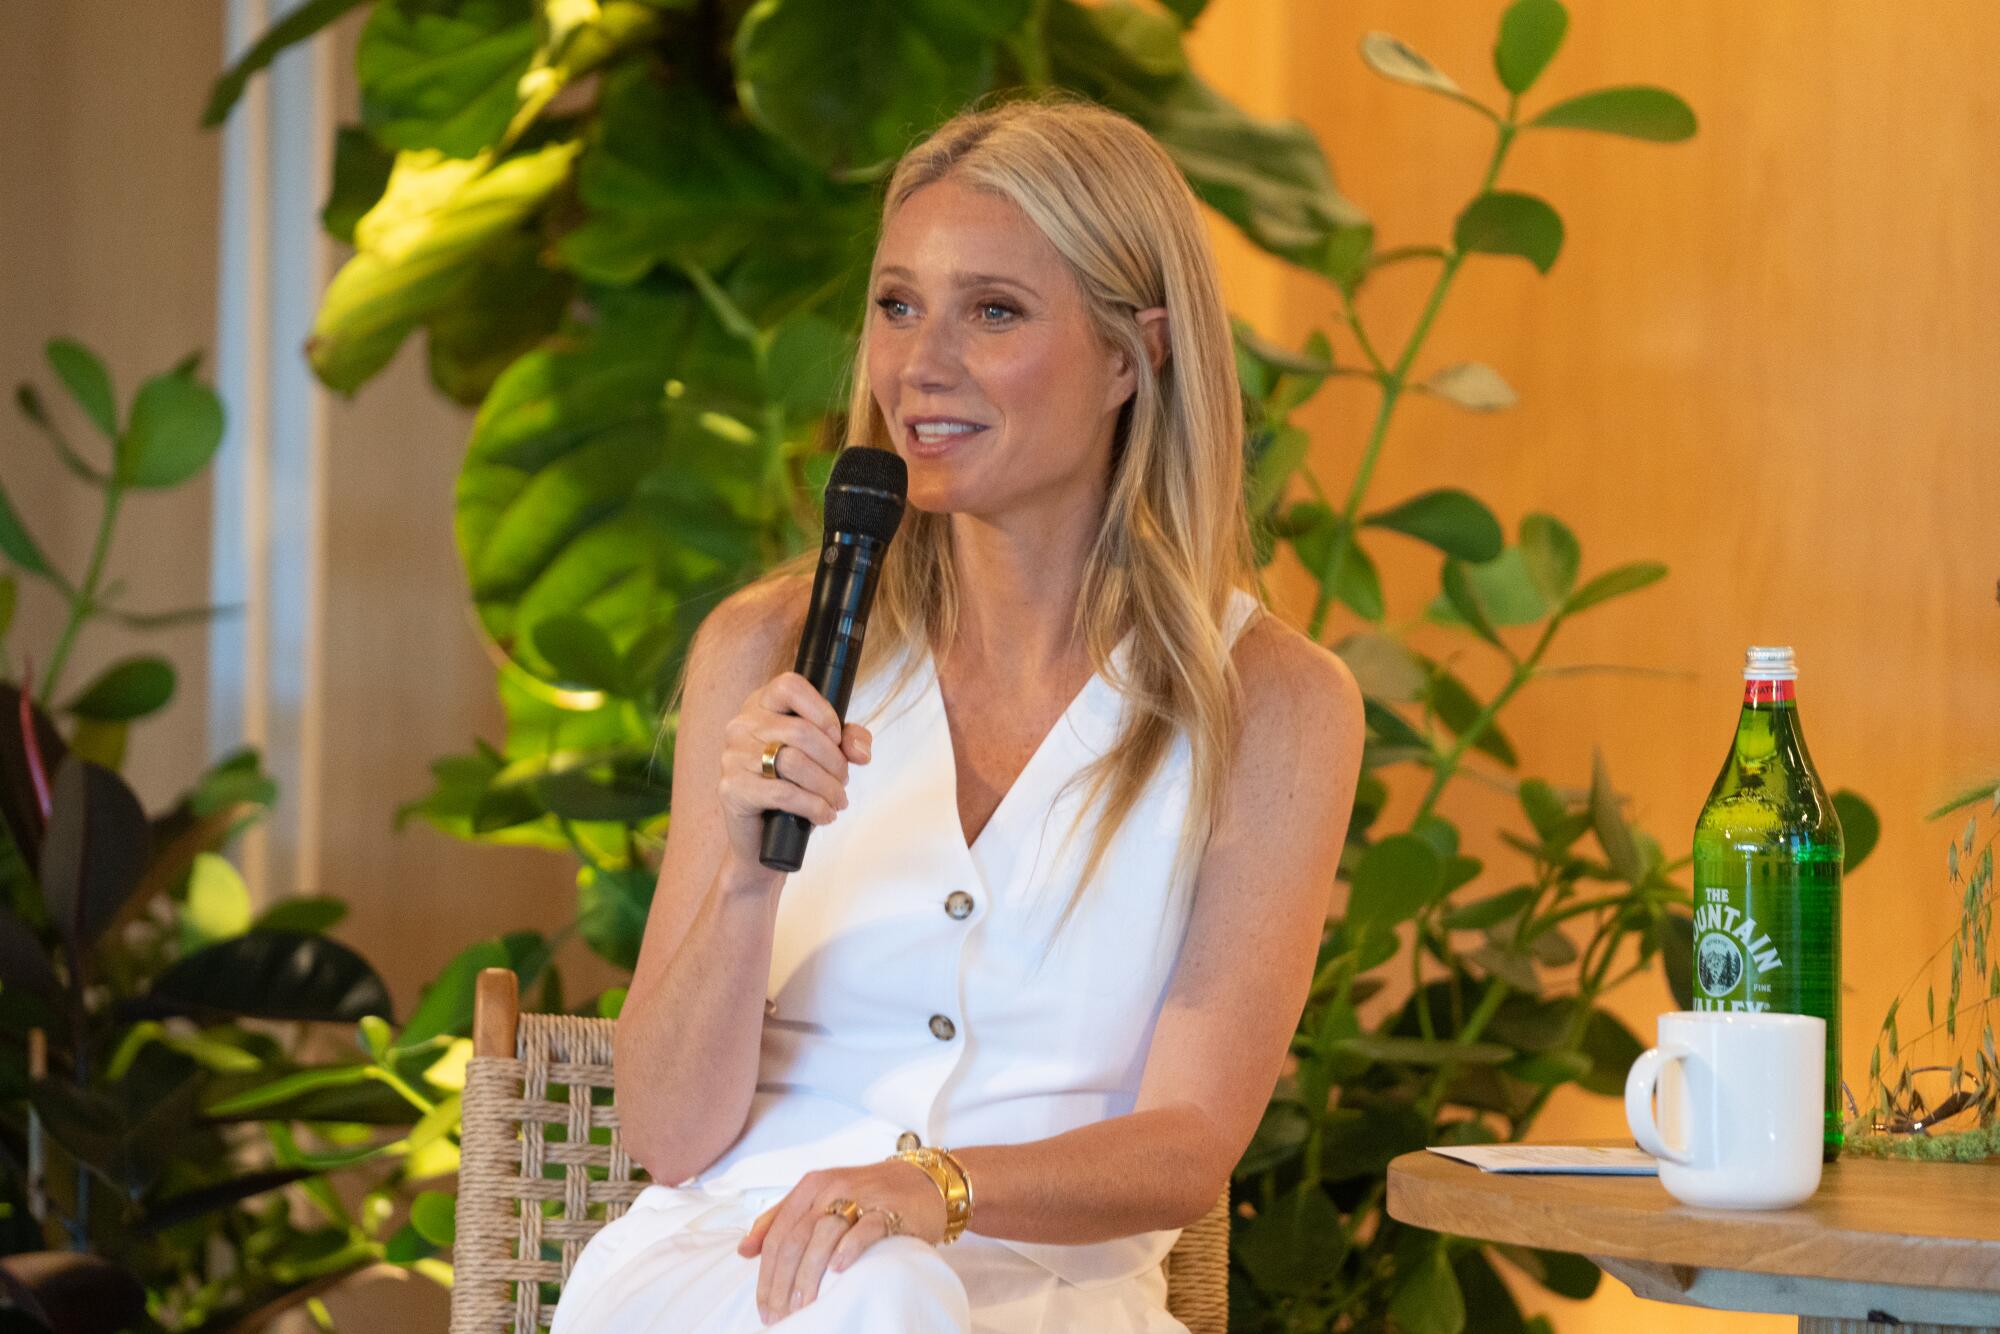 Gwyneth Paltrow speaks before a crowd at the Goop Immersive event in Santa Monica.